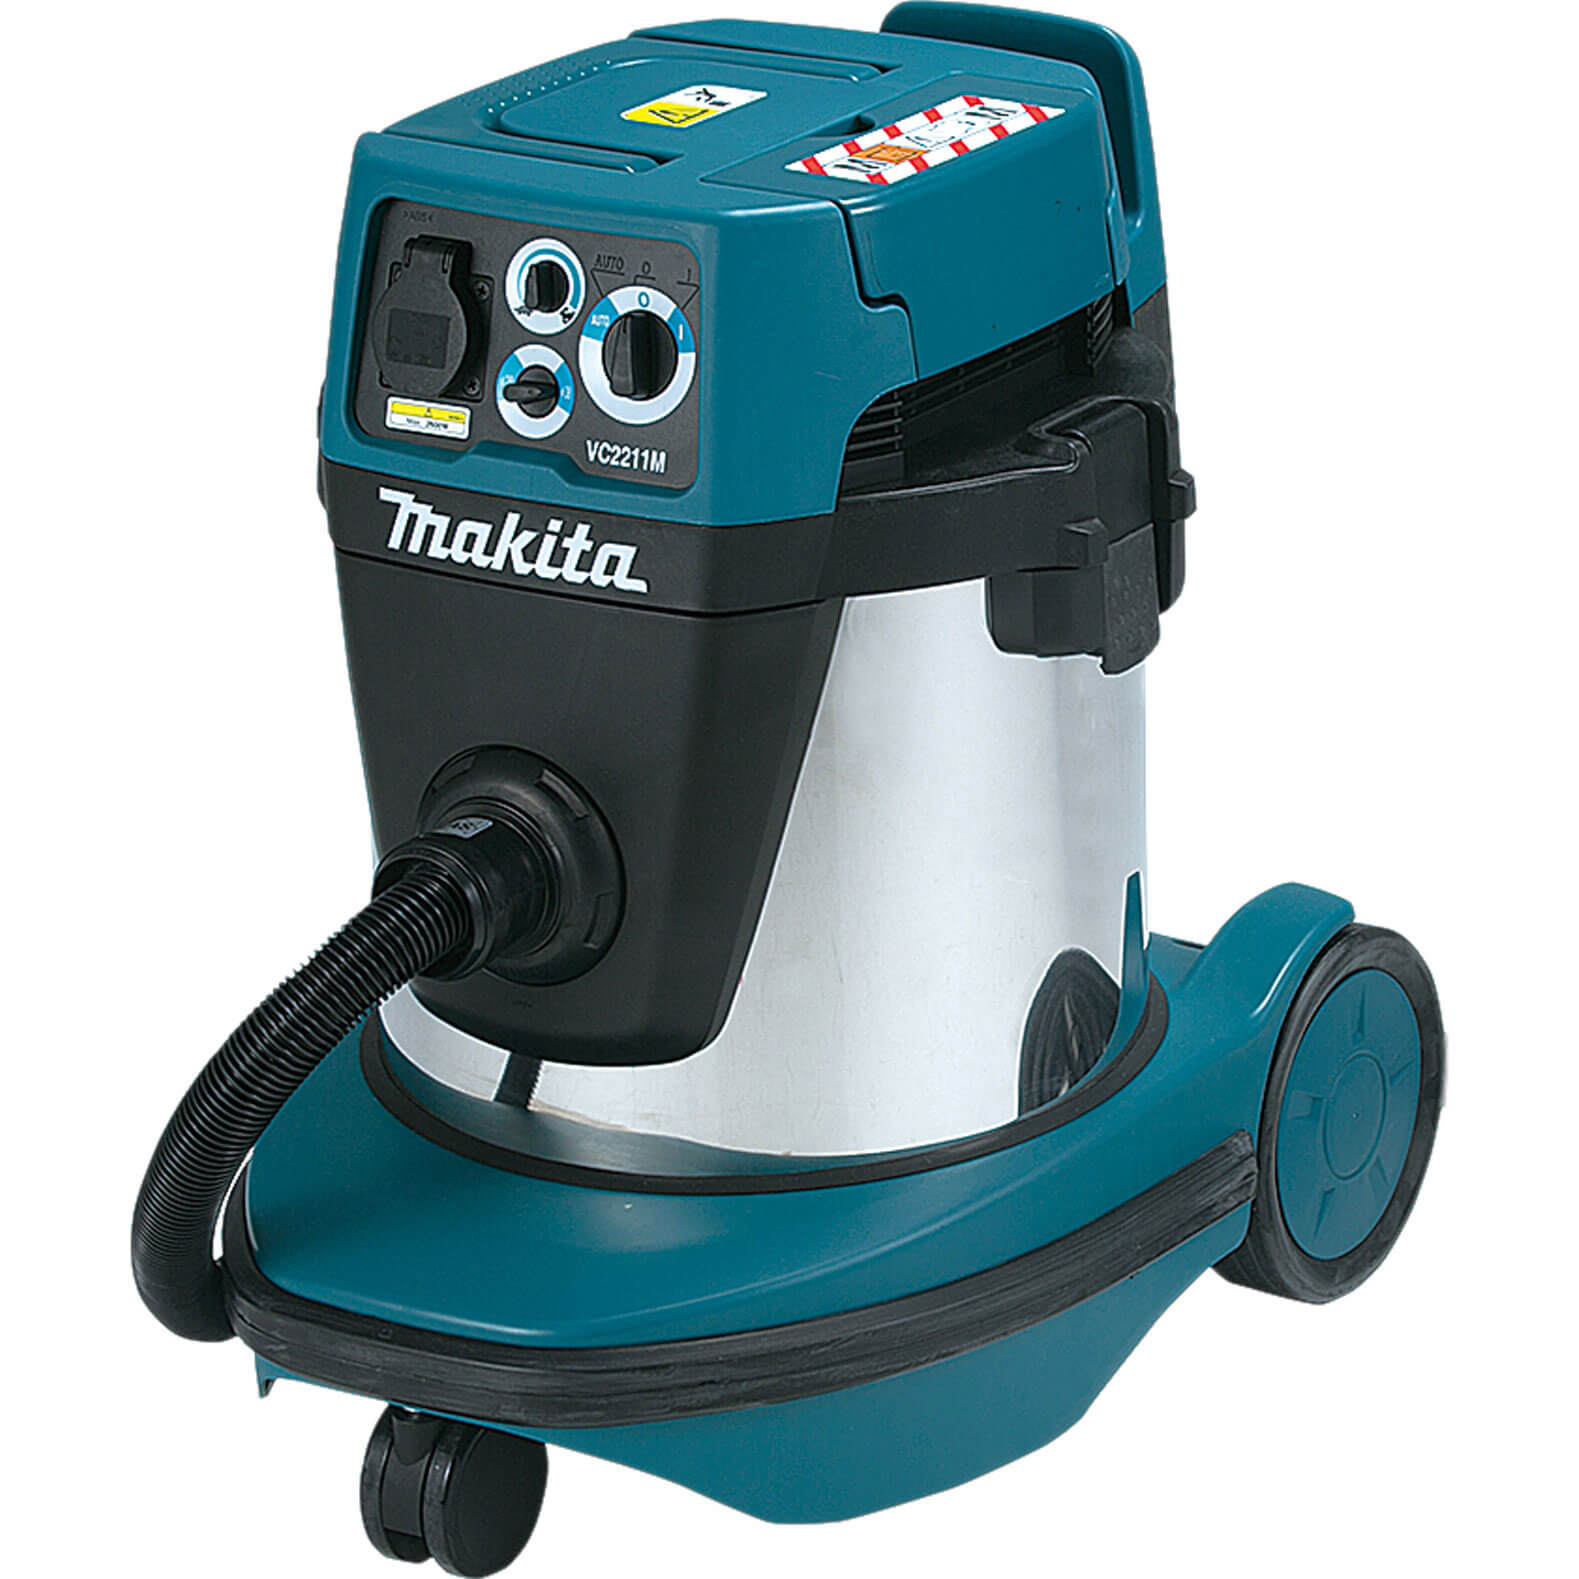 Image of Makita VC2211MX1 Dust Extractor M Class 240v